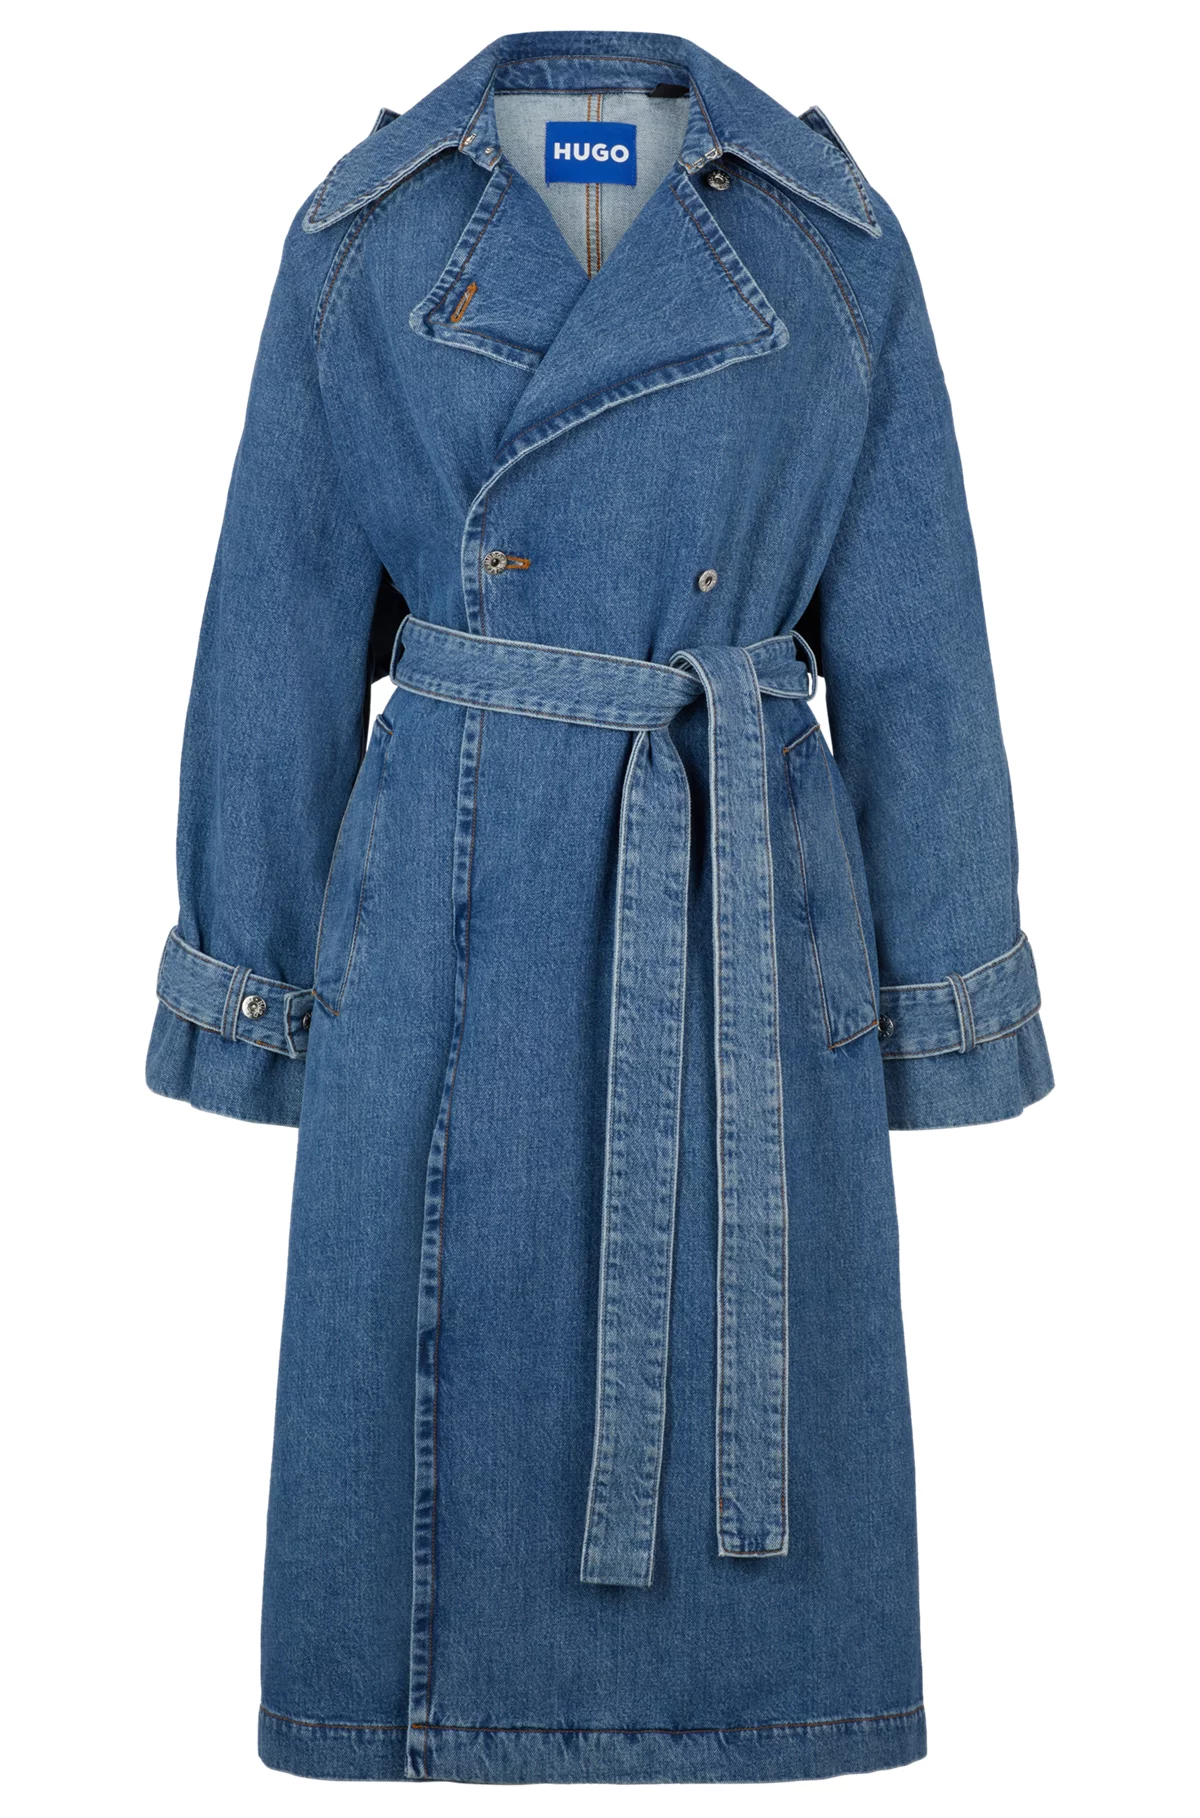 TRENCH COAT IN BLUE DENIM WITH BRANDED TRIMS